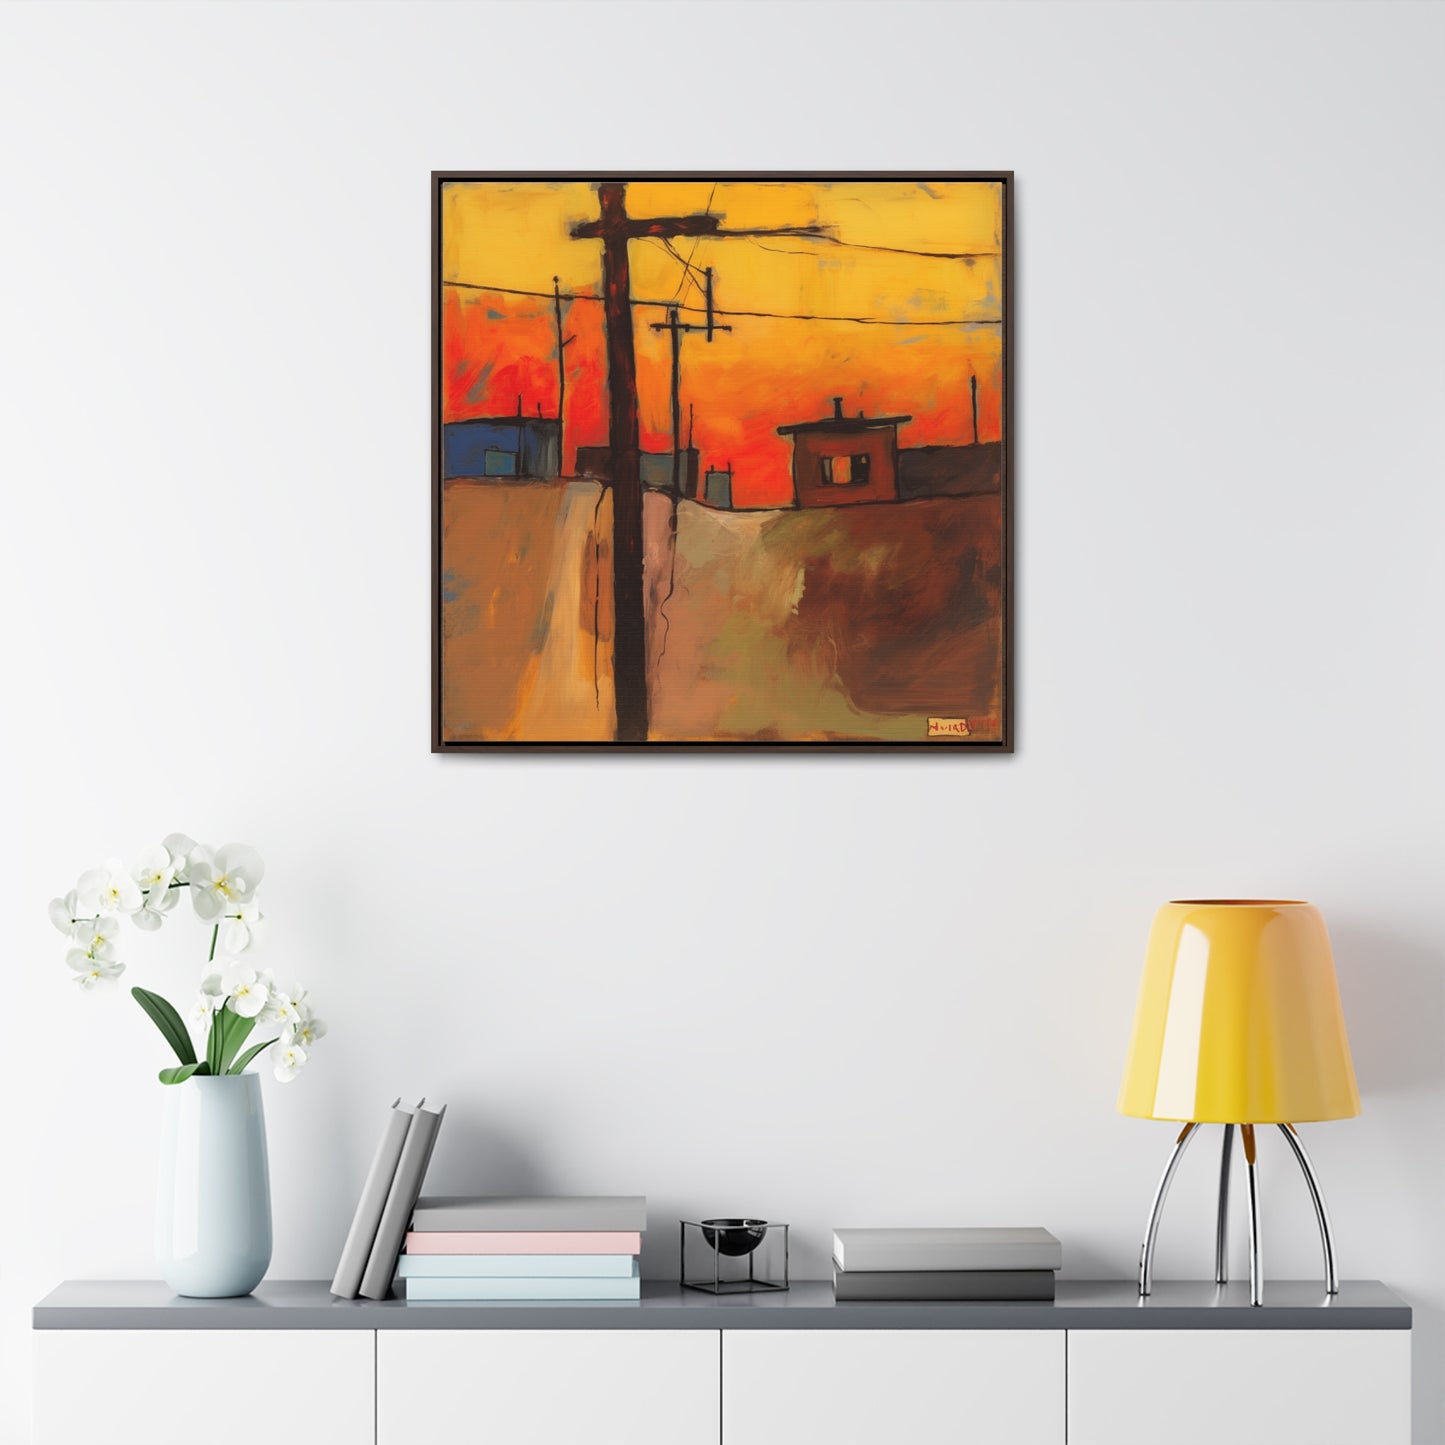 Land of the Sun 72, Valentinii, Gallery Canvas Wraps, Square Frame